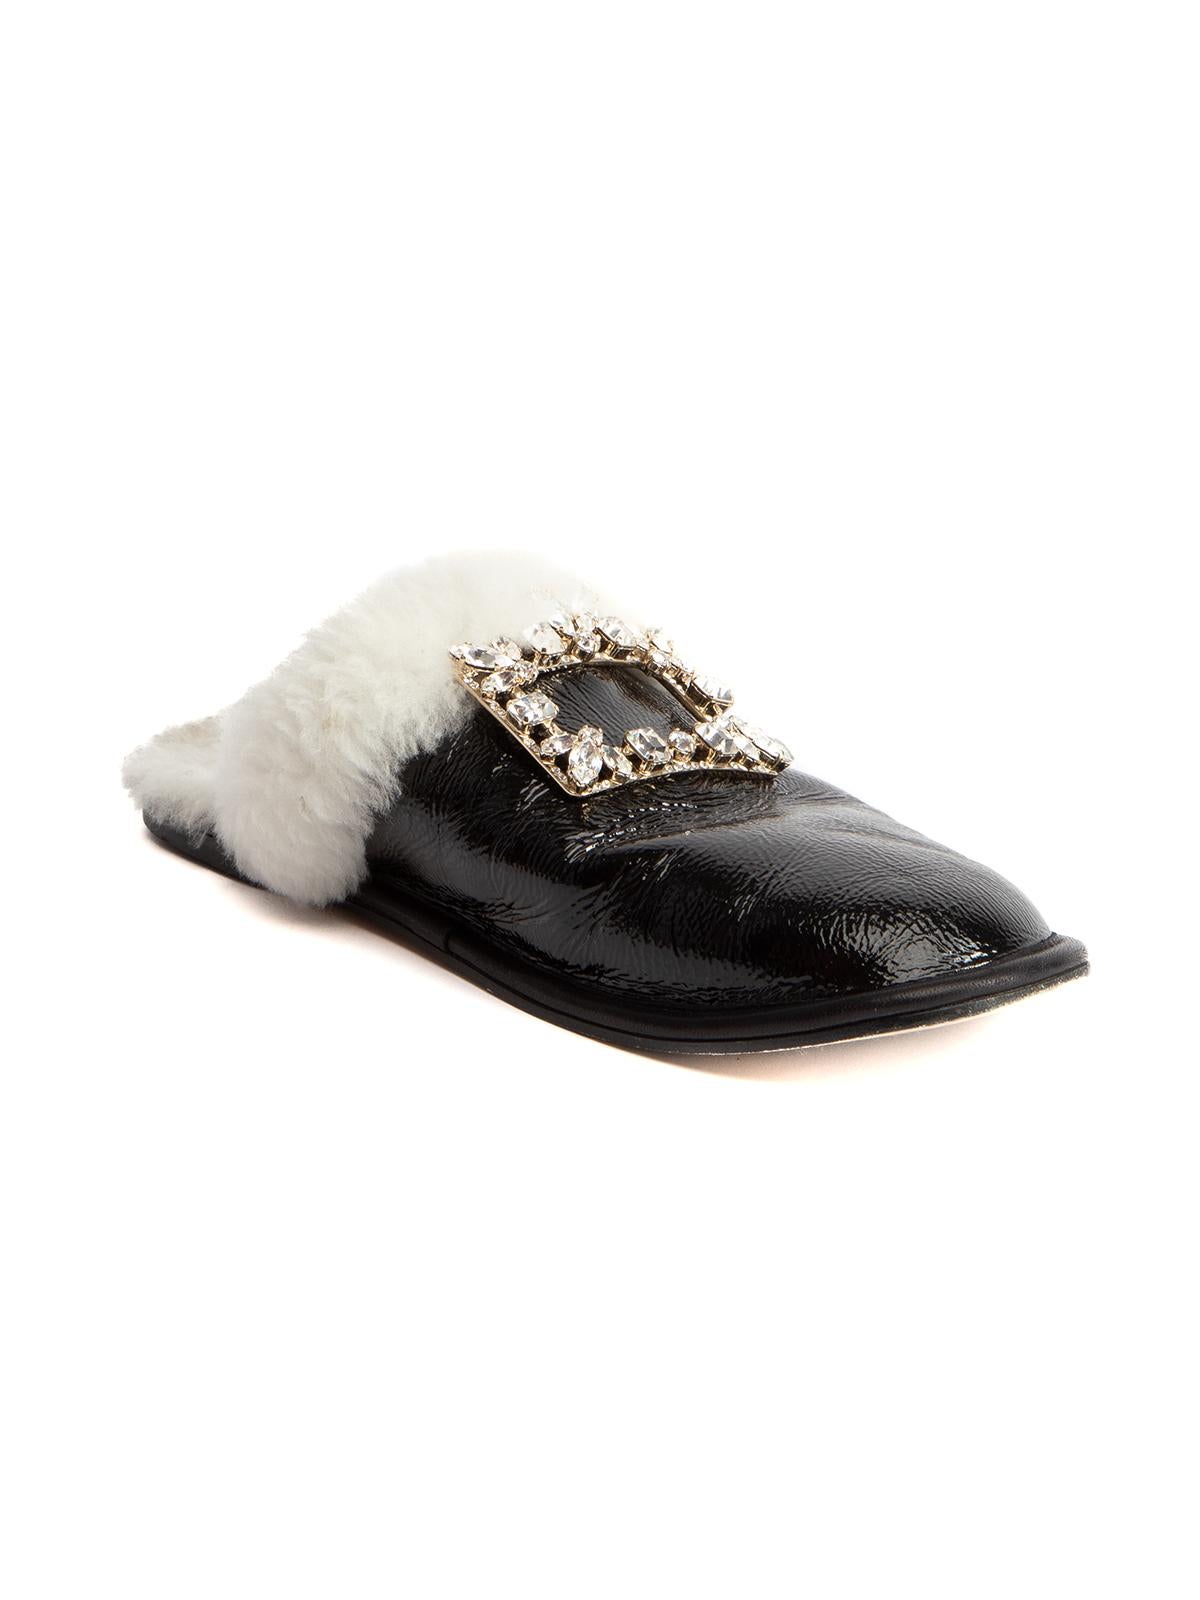 CONDITION is Very good. Minimal wear to slippers is evident. Minimal wear to outsole on this used Roger Vivier designer resale item Details Black and white Patent leather Flats Slippers Round toe Shearling lined insole Square crystal embellished